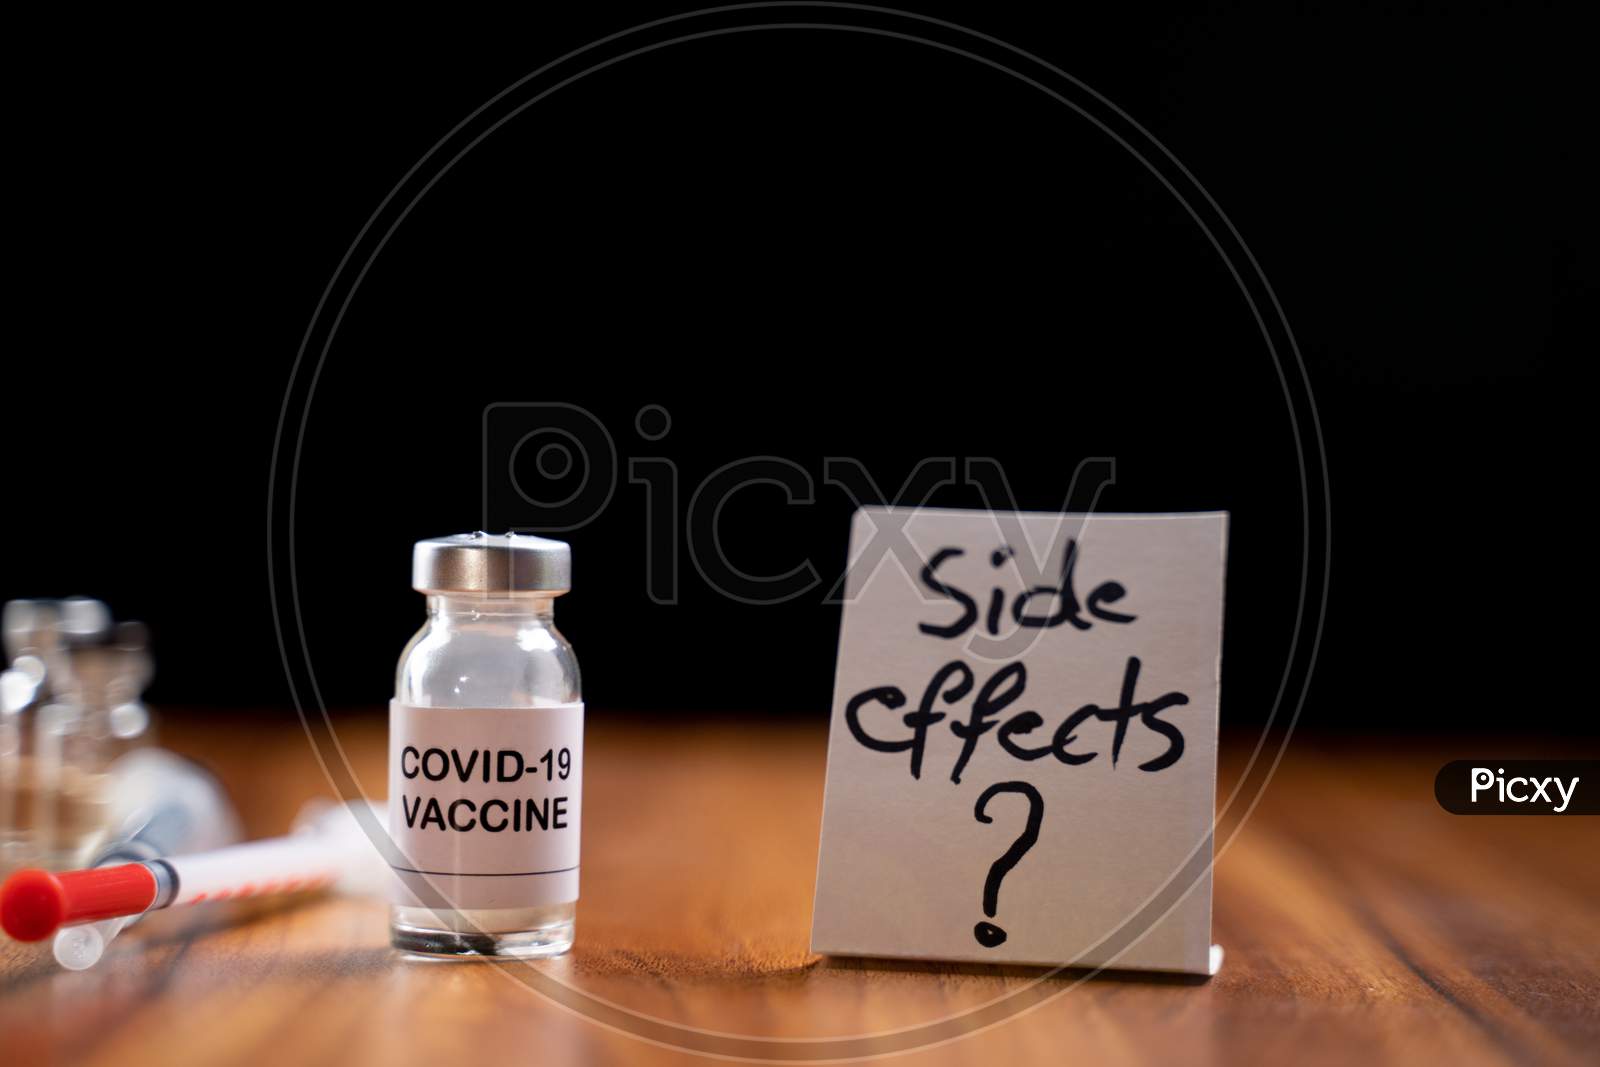 Concept Of Coronavirus Covid-19 Vaccination Side Effects Doubts And Questions Showing With Vaccine Bottle.